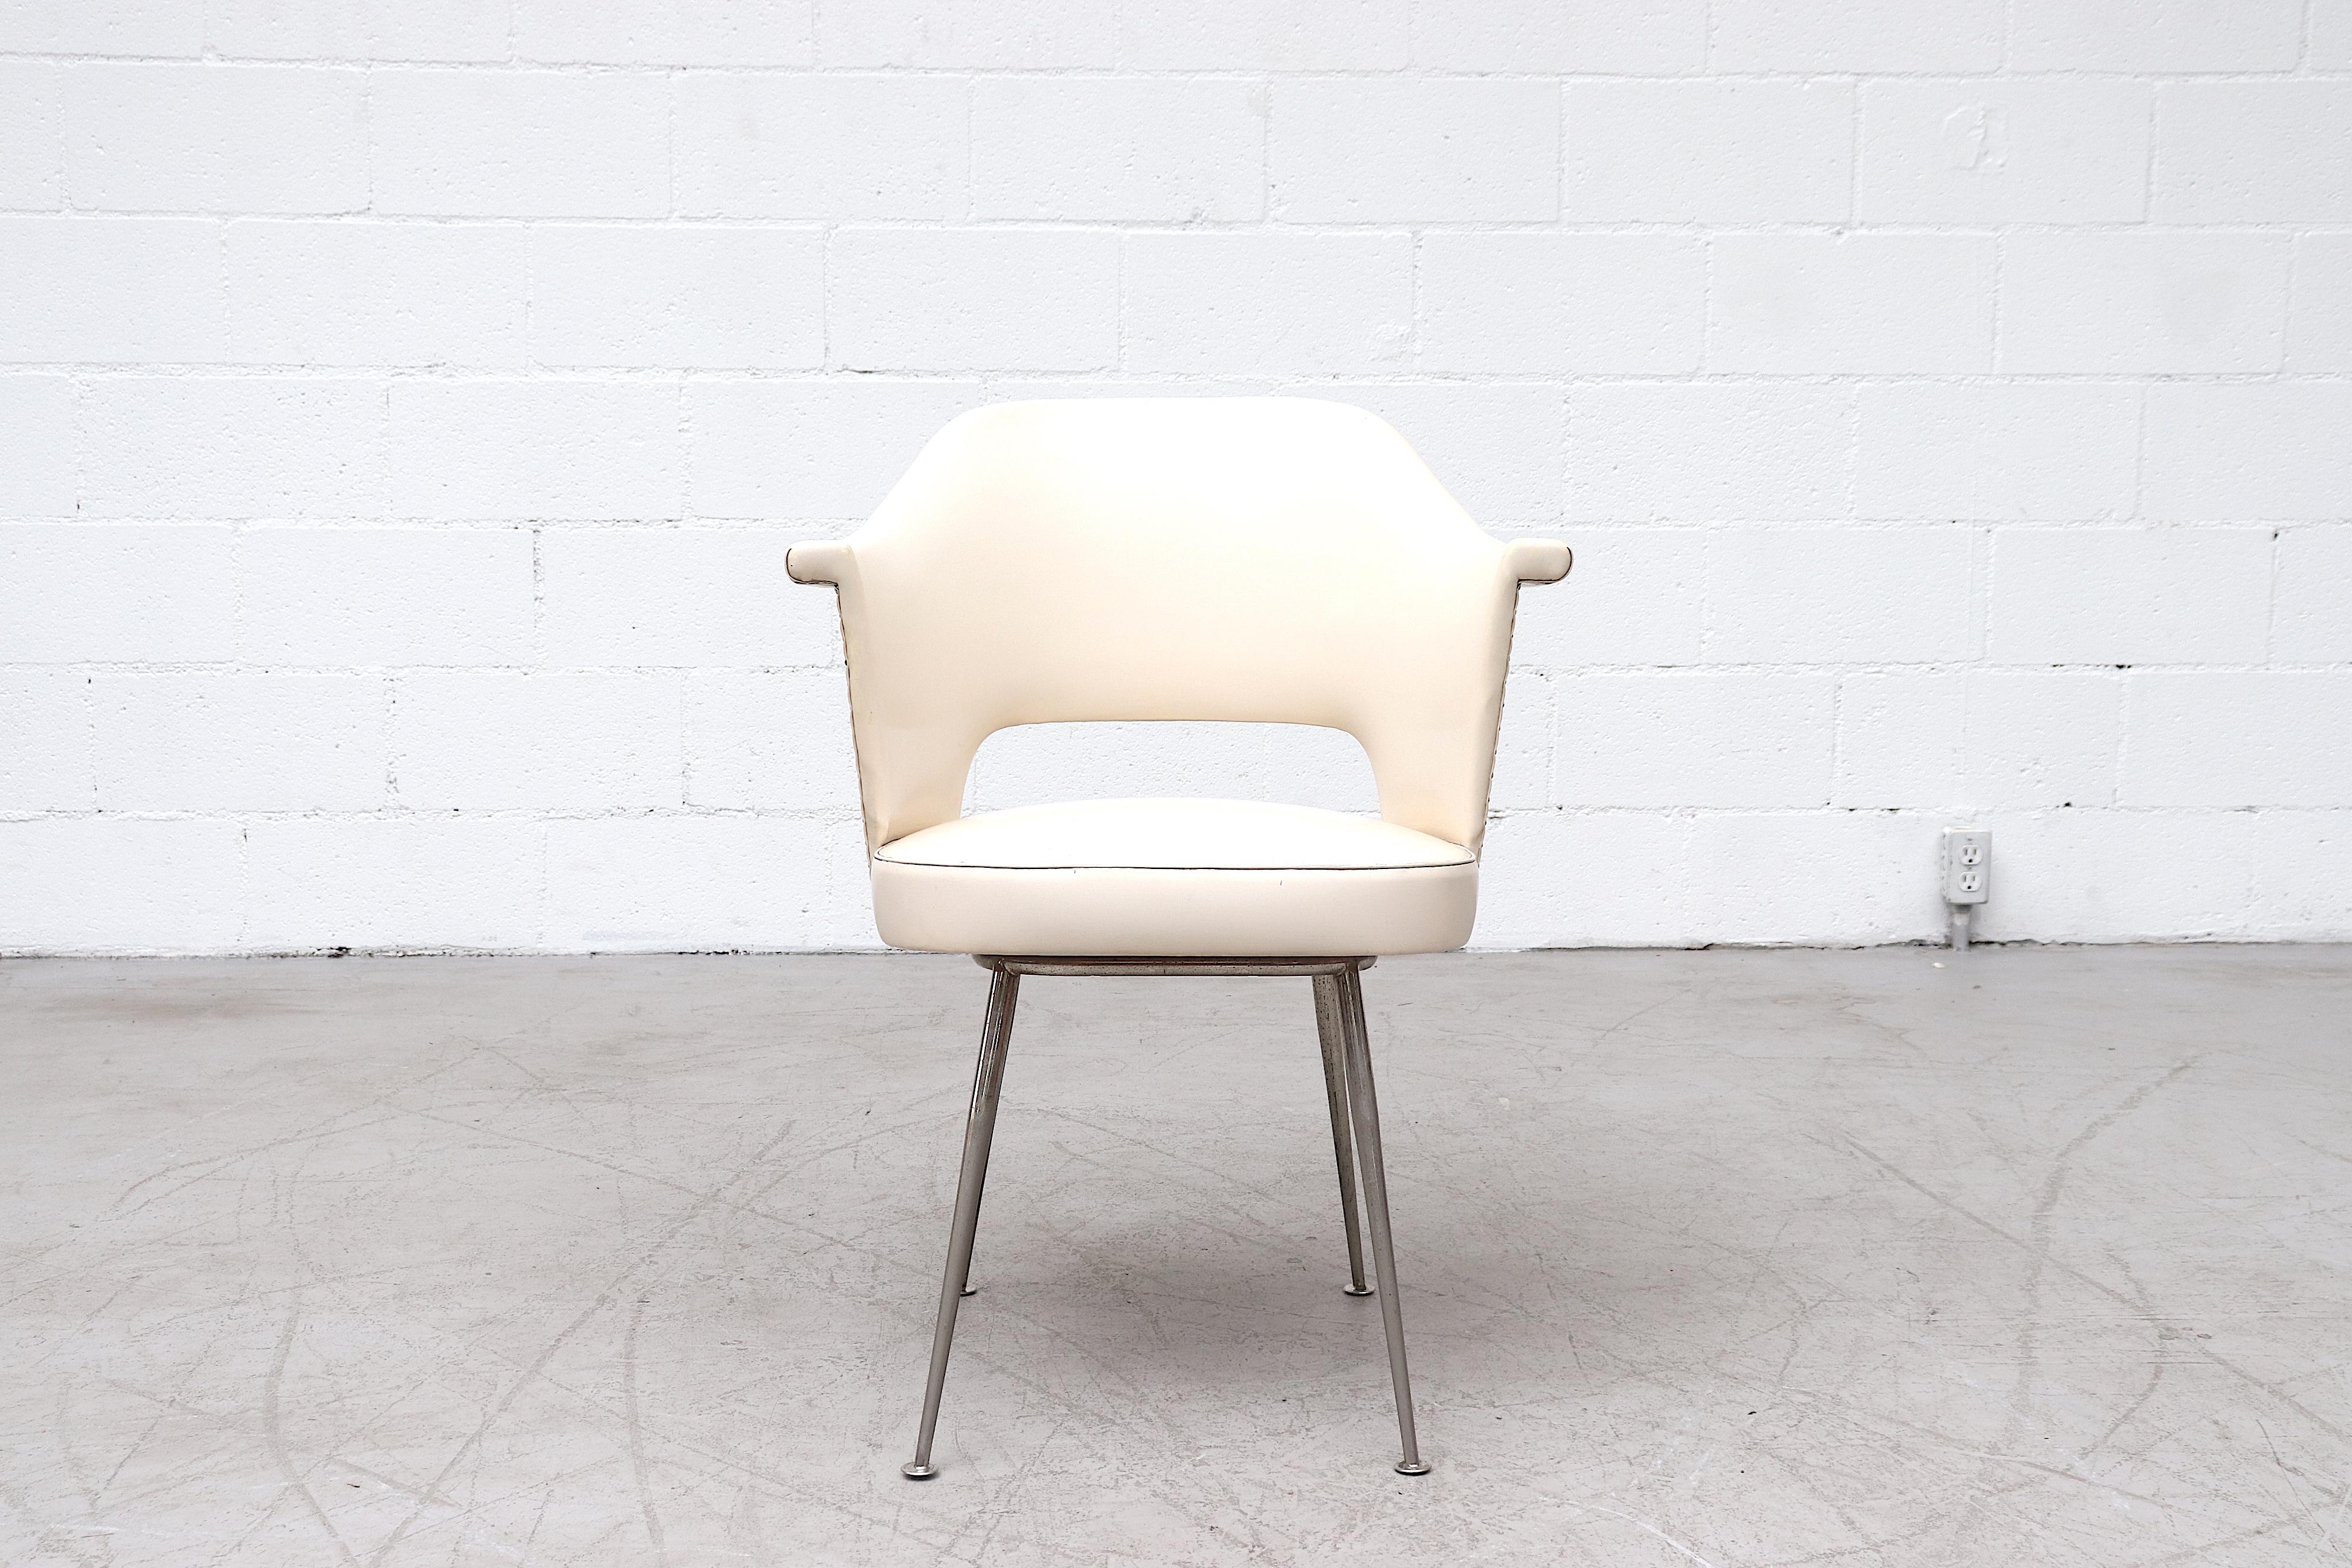 Stunning Saarinen style arm chair with white Skai upholstery and tapered metal legs. Stunning design with smooth lines and stud accents. In original condition with visible wear, including some discoloration and heavy patina to the metal legs. Wear